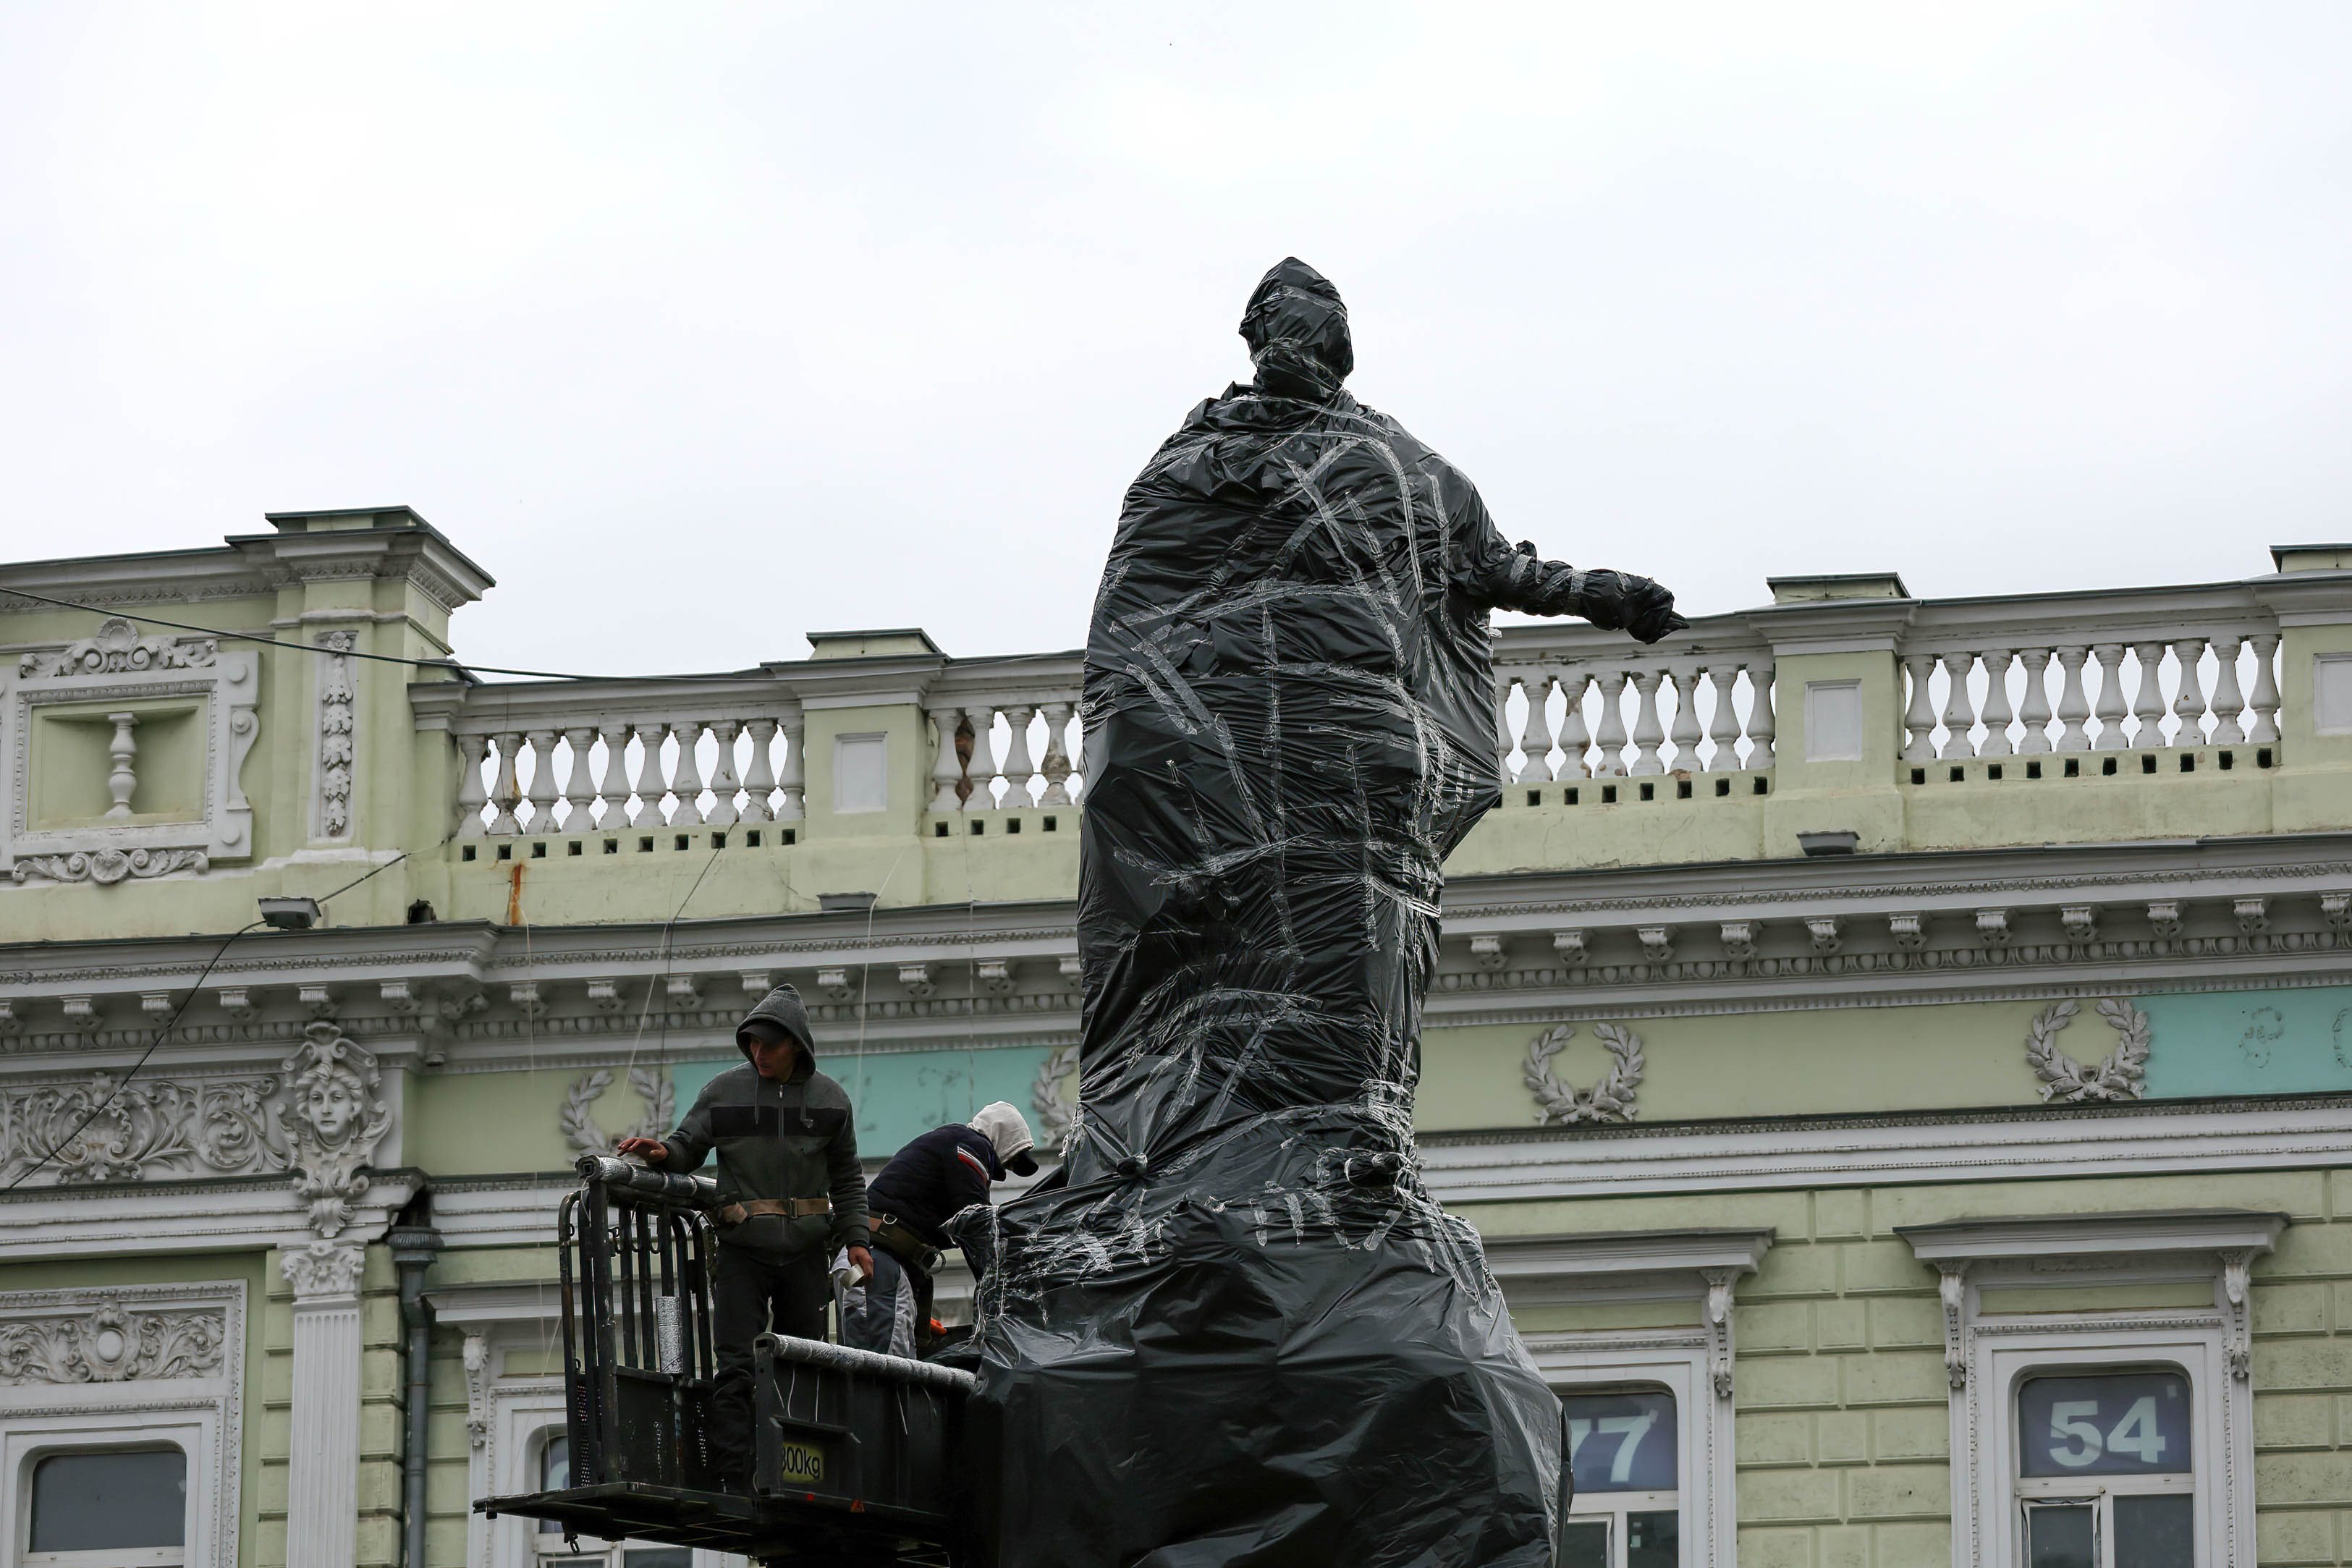 Workers are seen wrapping a monument to Catherine II with a